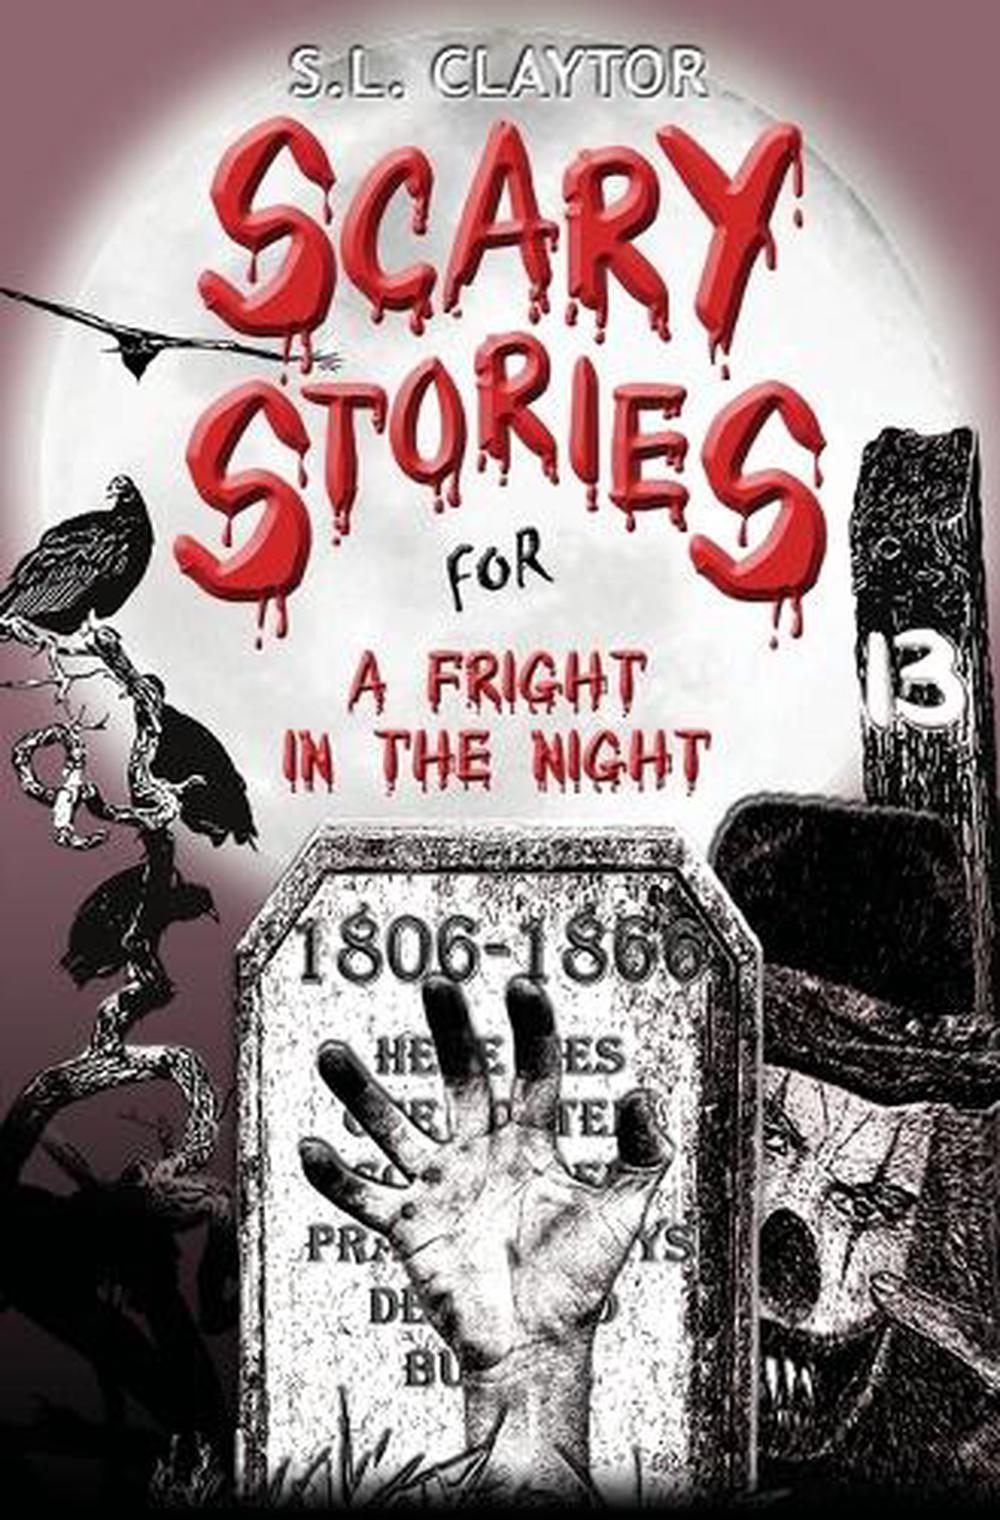 Scary Stories for a Fright in the Night by S.L. Claytor